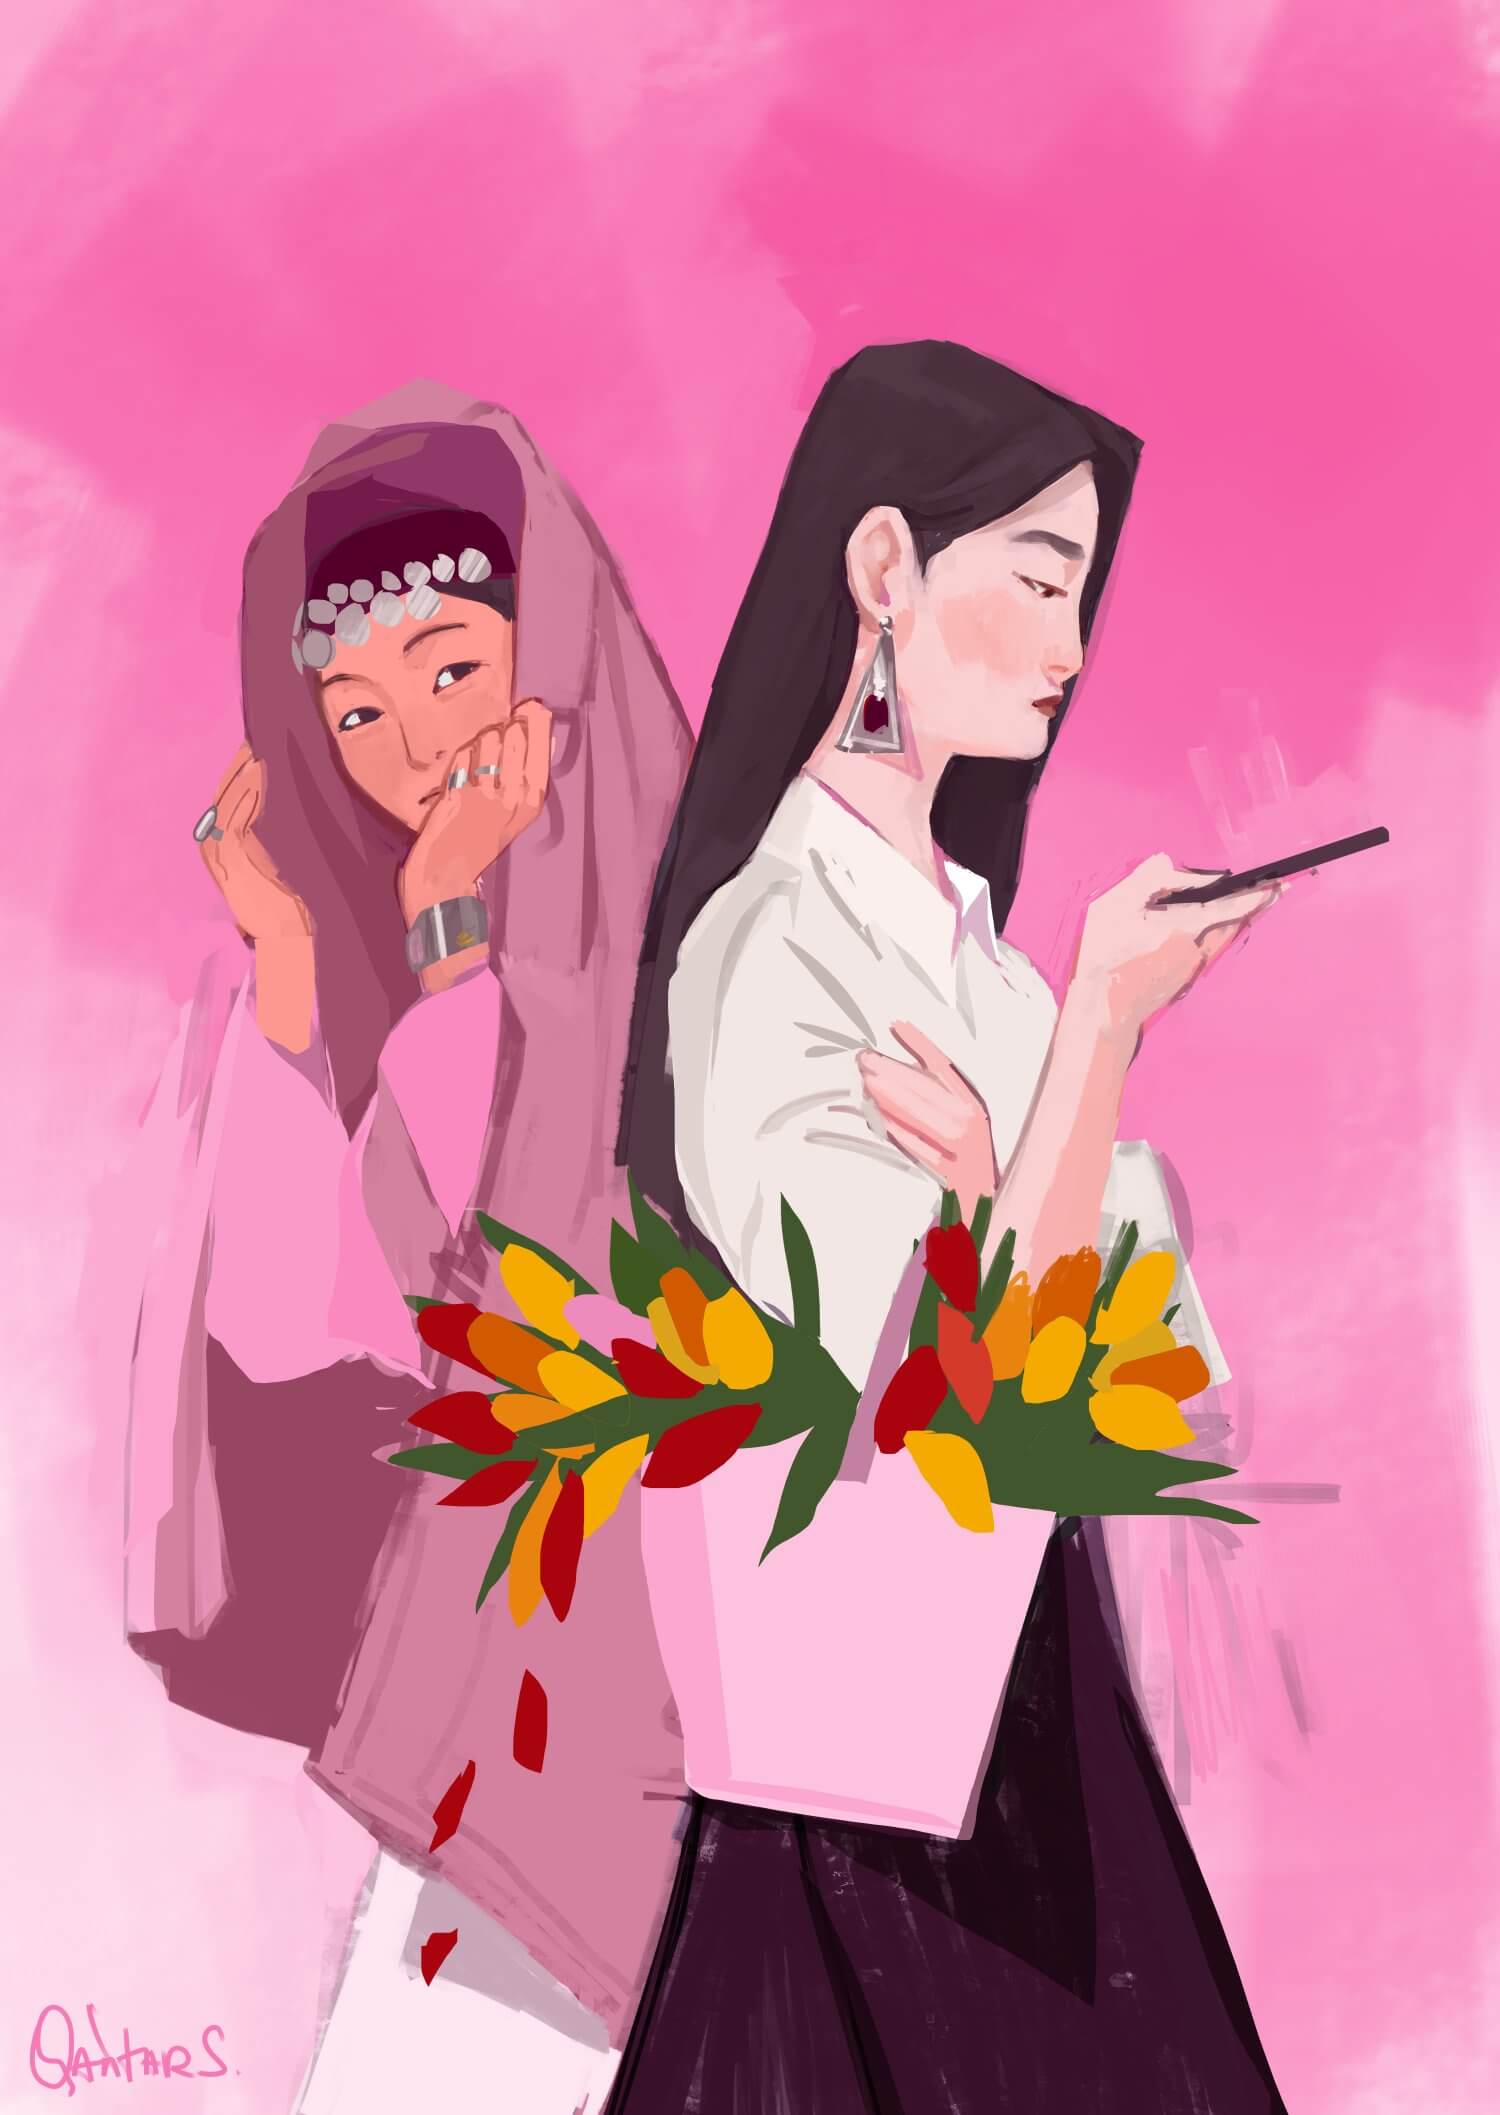 In a digital drawing with mostly pink tones, a Central Asian woman with a head covering passes by another Central Asian woman looking at her phone.